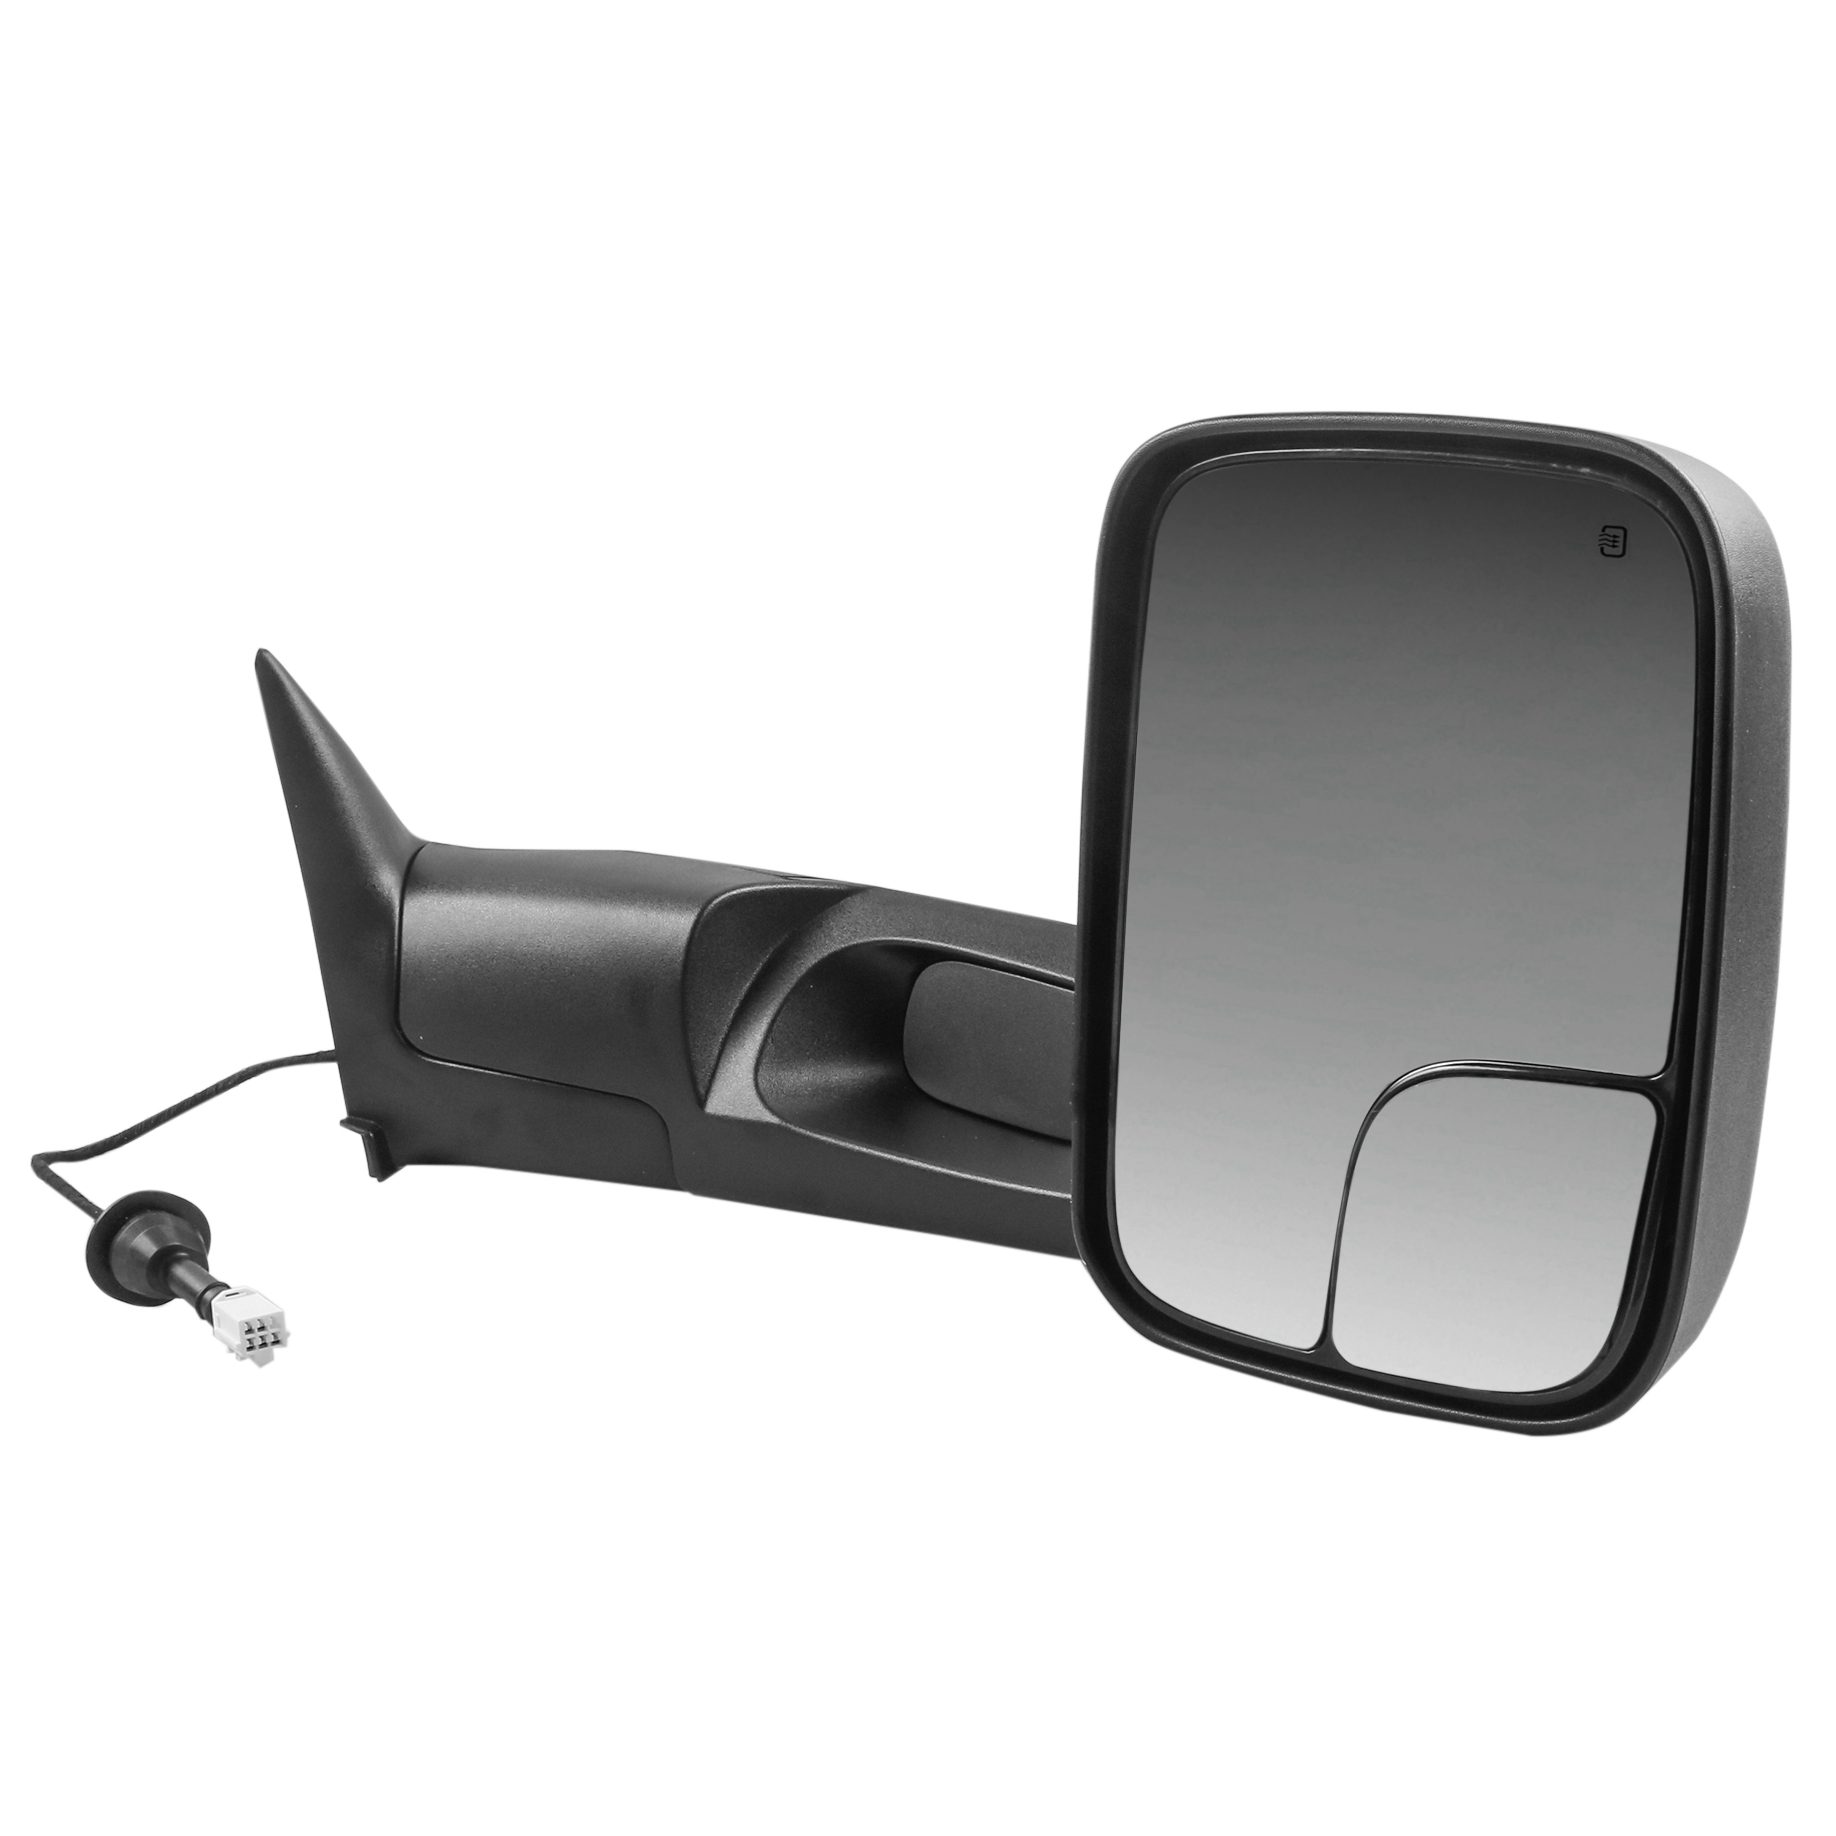 RH Passenger Side Power Heated Tow Mirror for 98-02 Dodge Ram 1500 2500 3500 New | eBay 2001 Dodge Ram 2500 Passenger Side Mirror